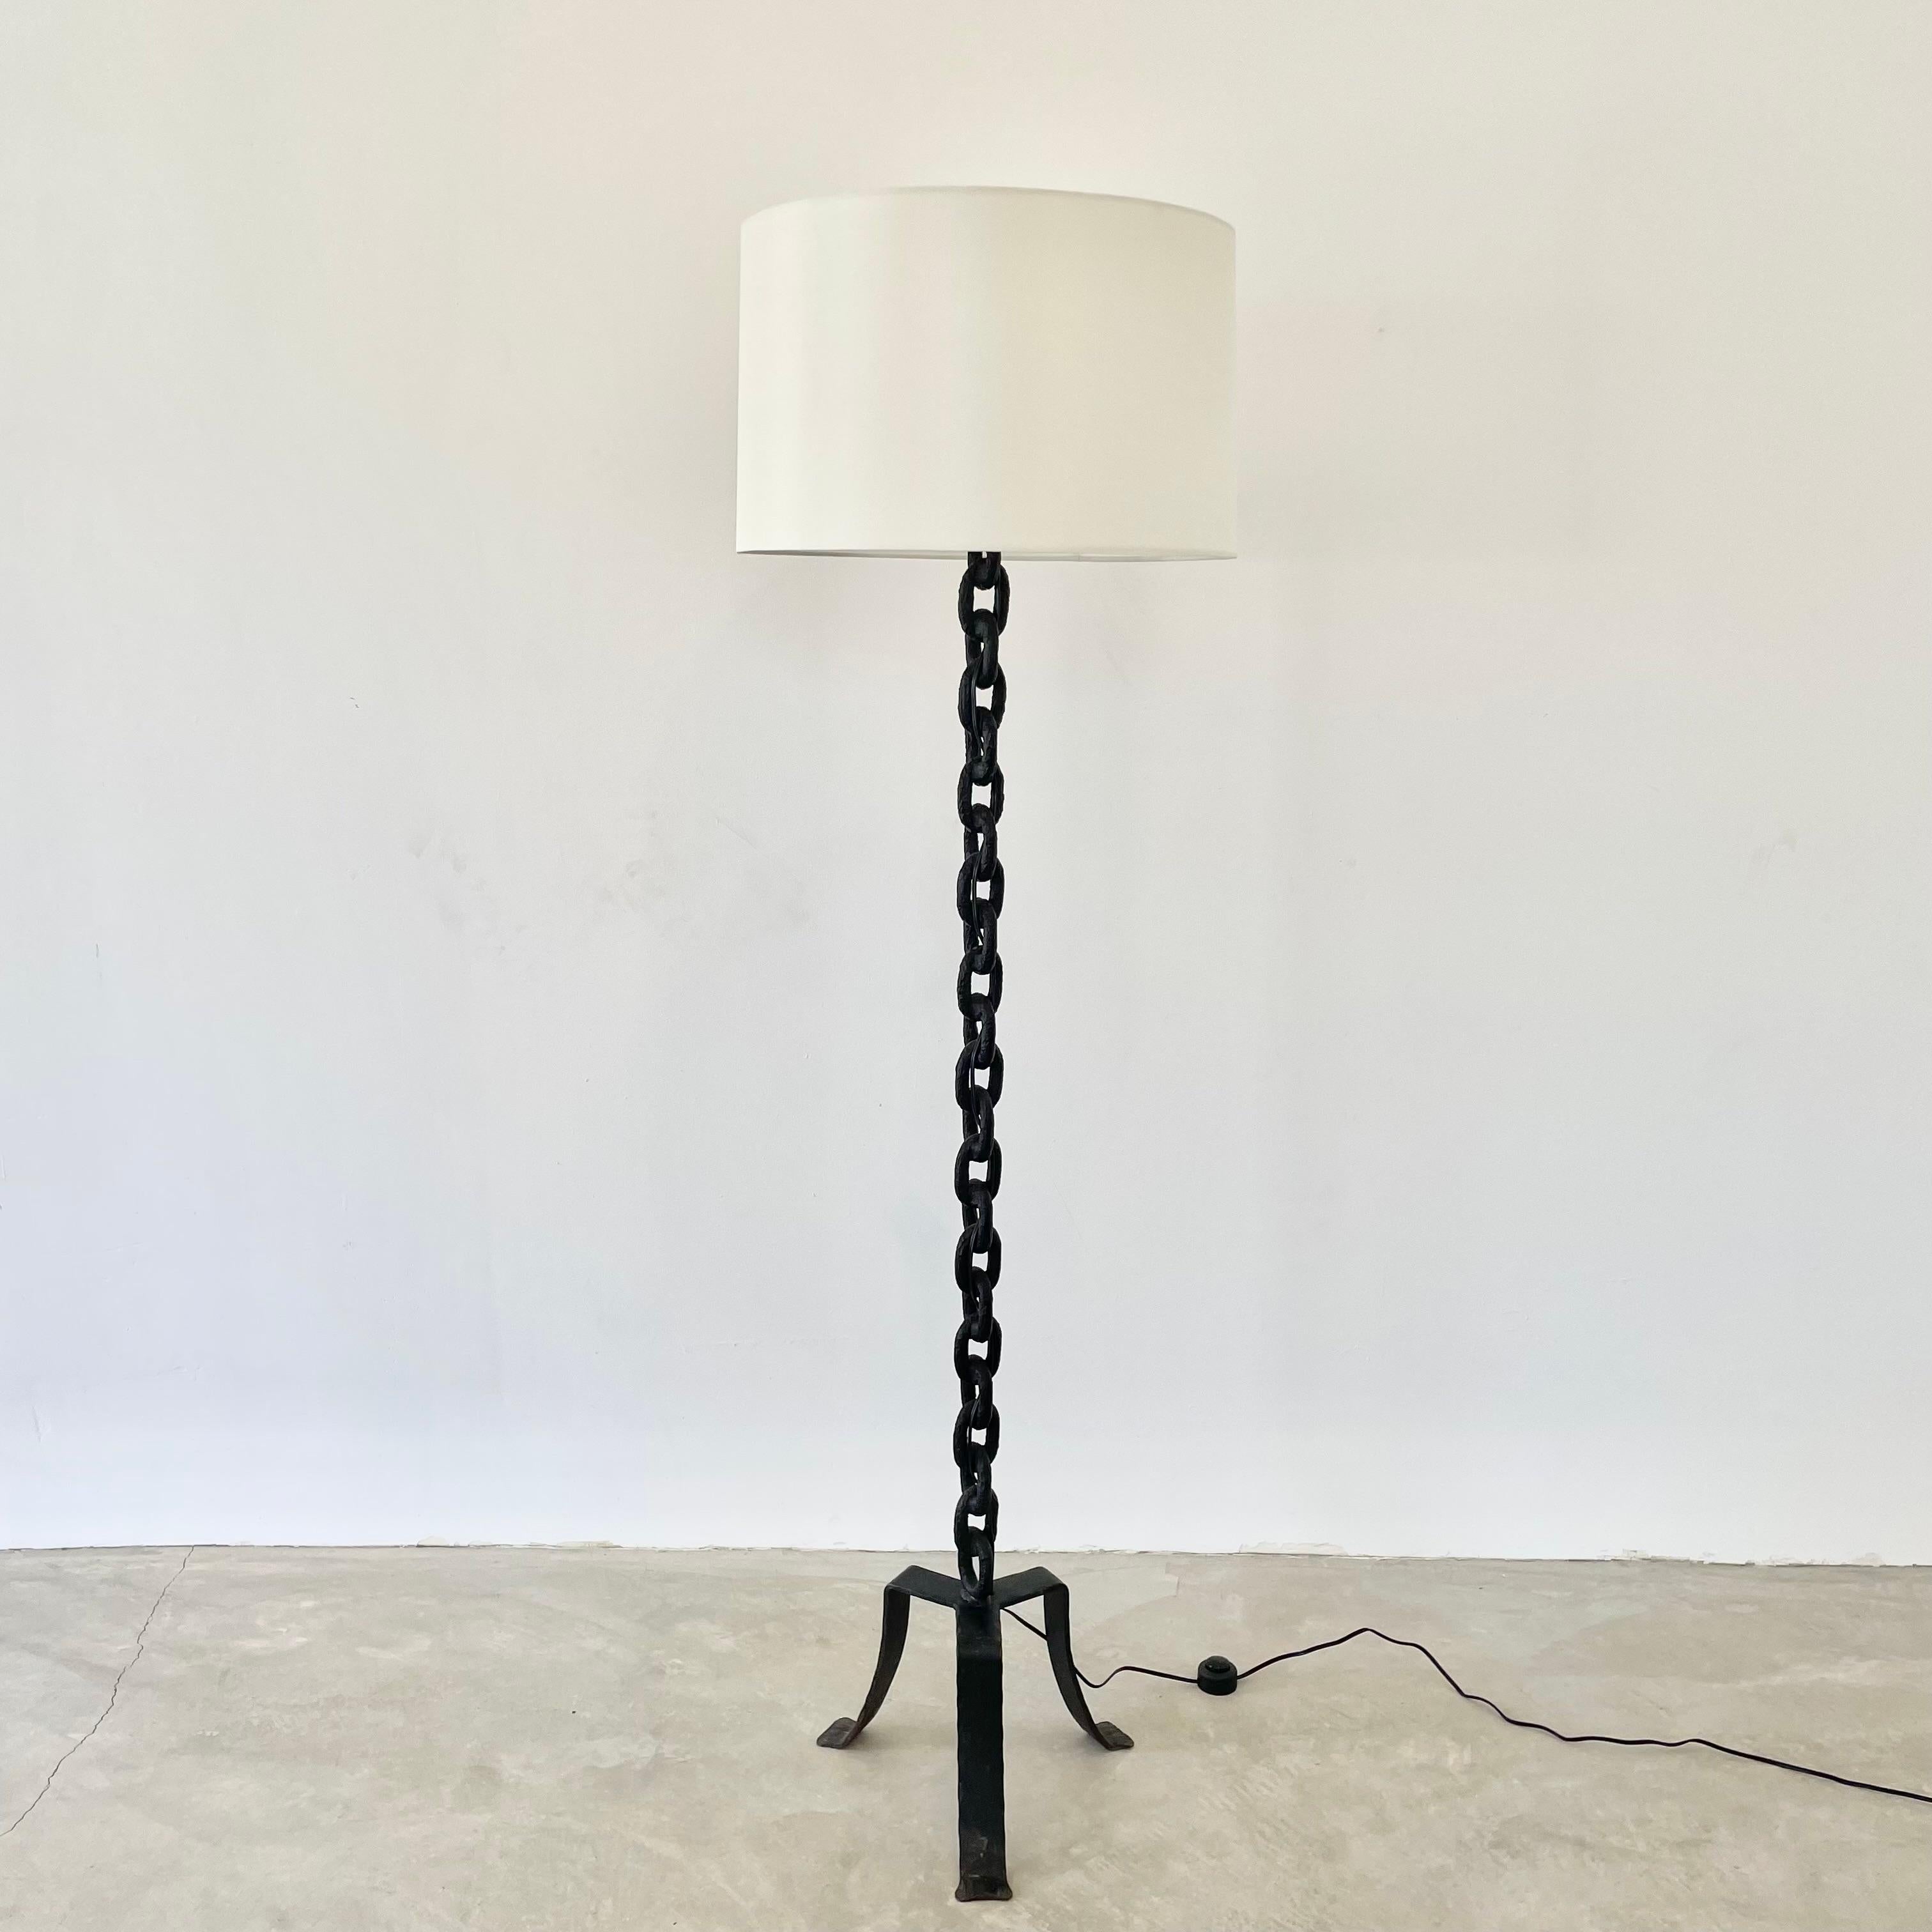 Brutalist iron chain link floor lamp, made in 1950s France. Just over 5.5 feet tall. Extremely heavy and substantial lamp. Tripod base with rustic iron boat chain welded together and painted in a matte black. Features a new custom silk shade with